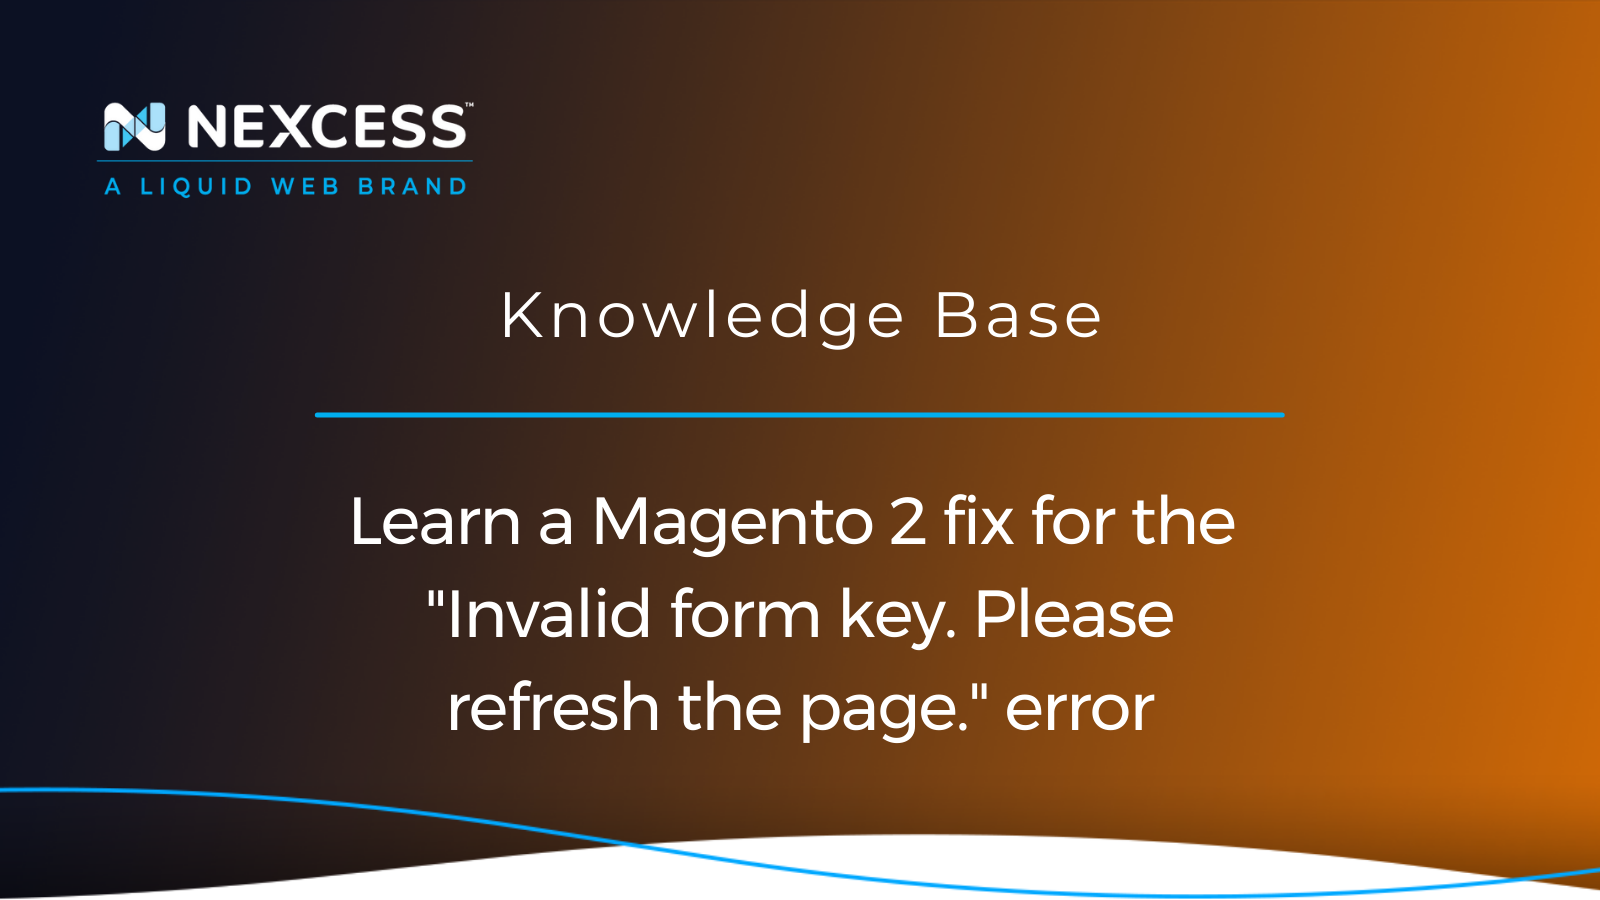 Learn a Magento 2 fix for the "Invalid form key. Please refresh the page." error